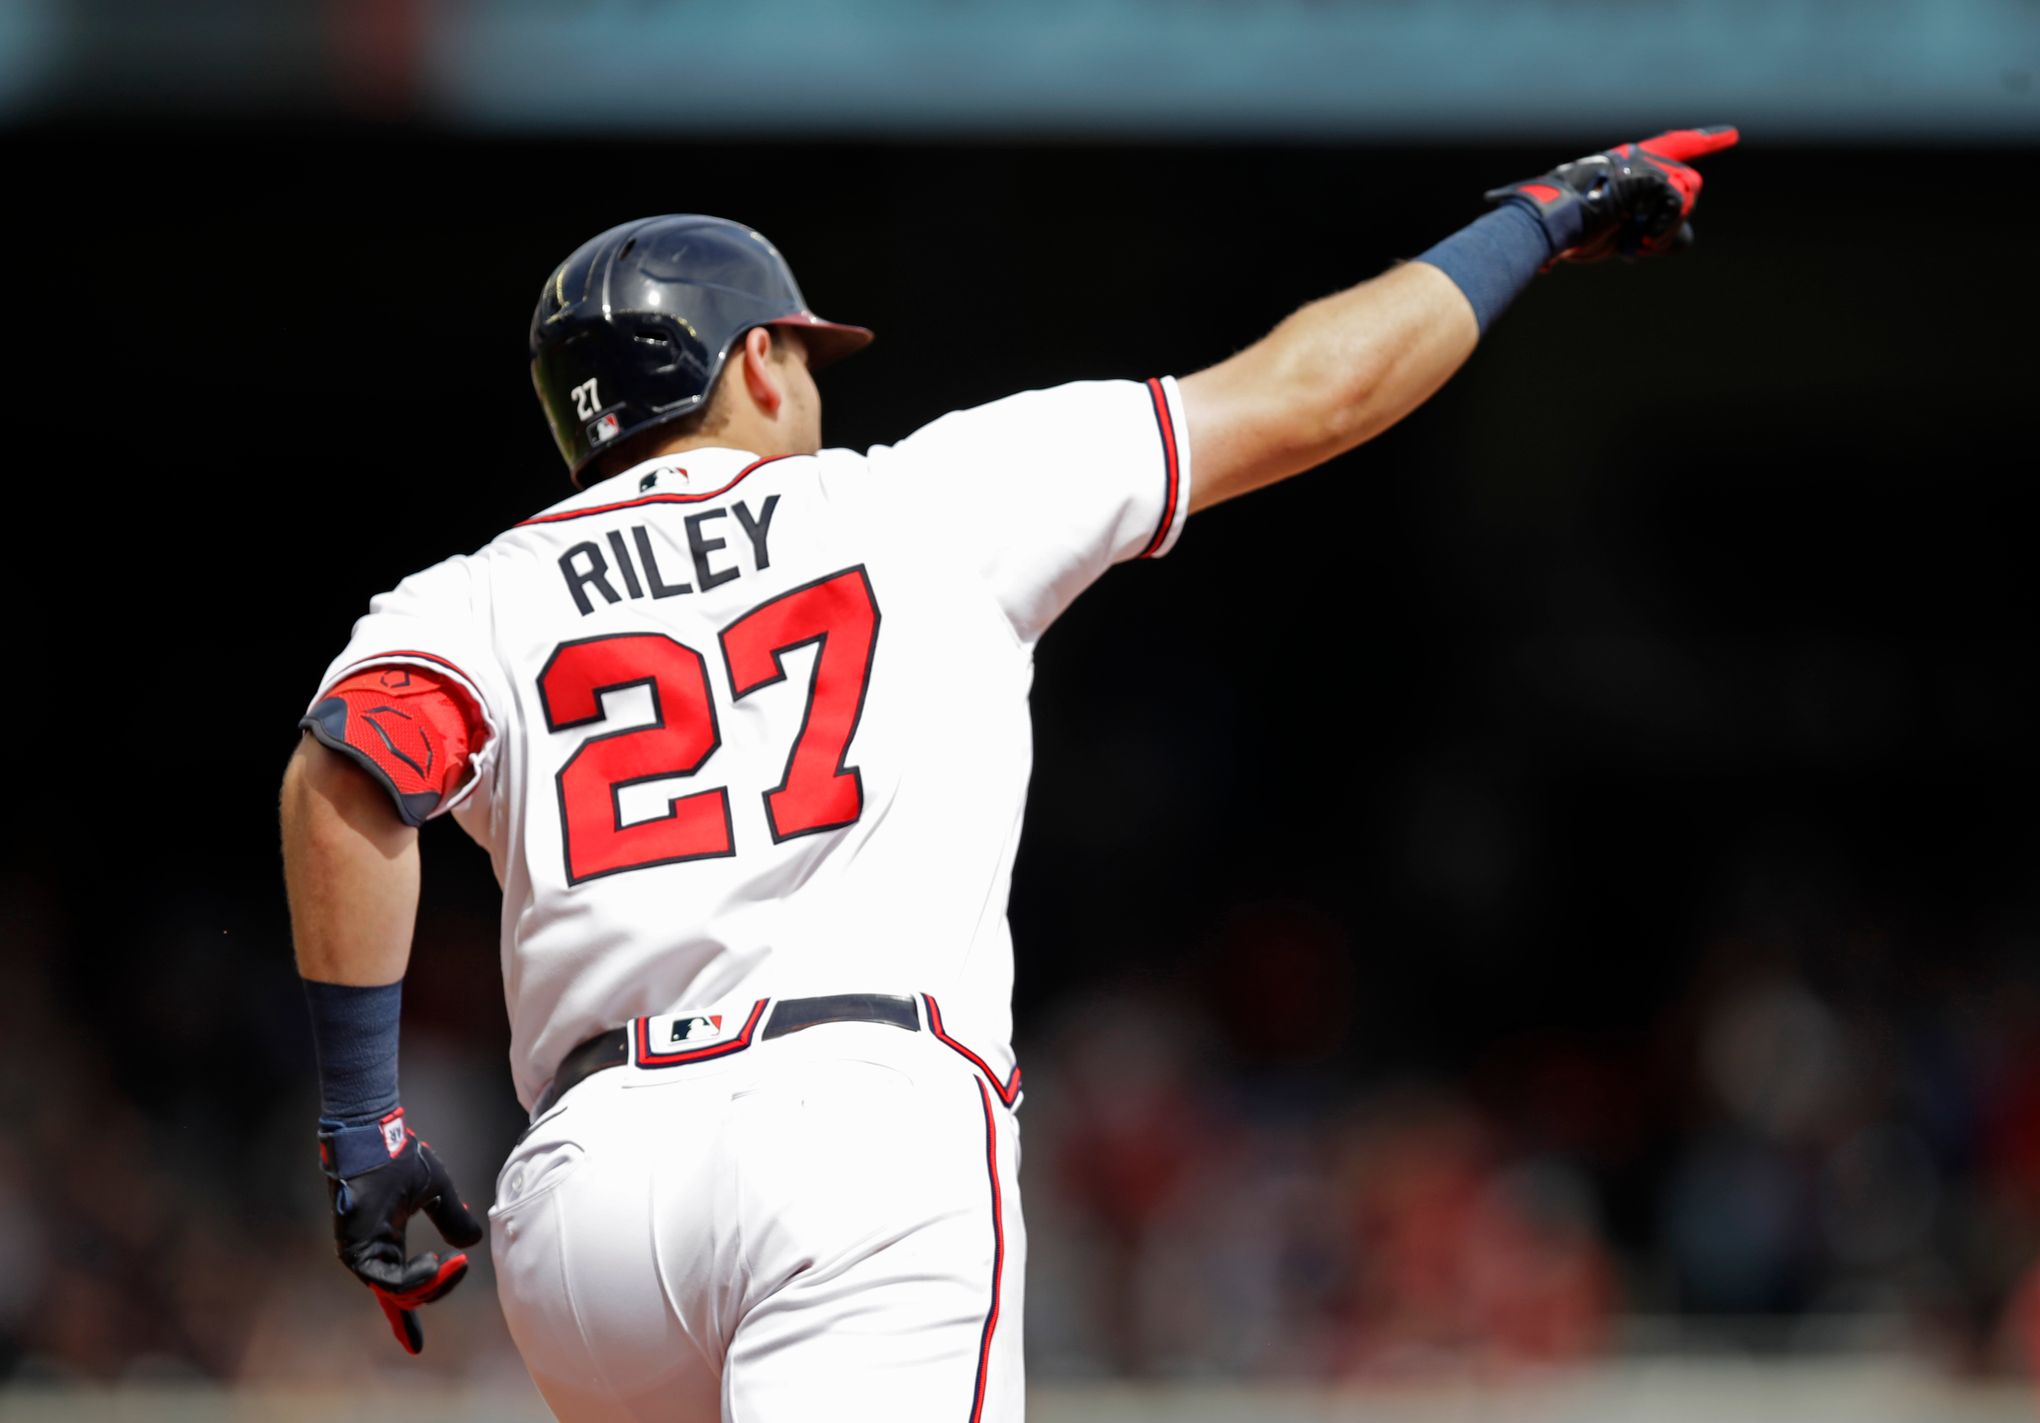 Braves win on opening day vs. Nationals